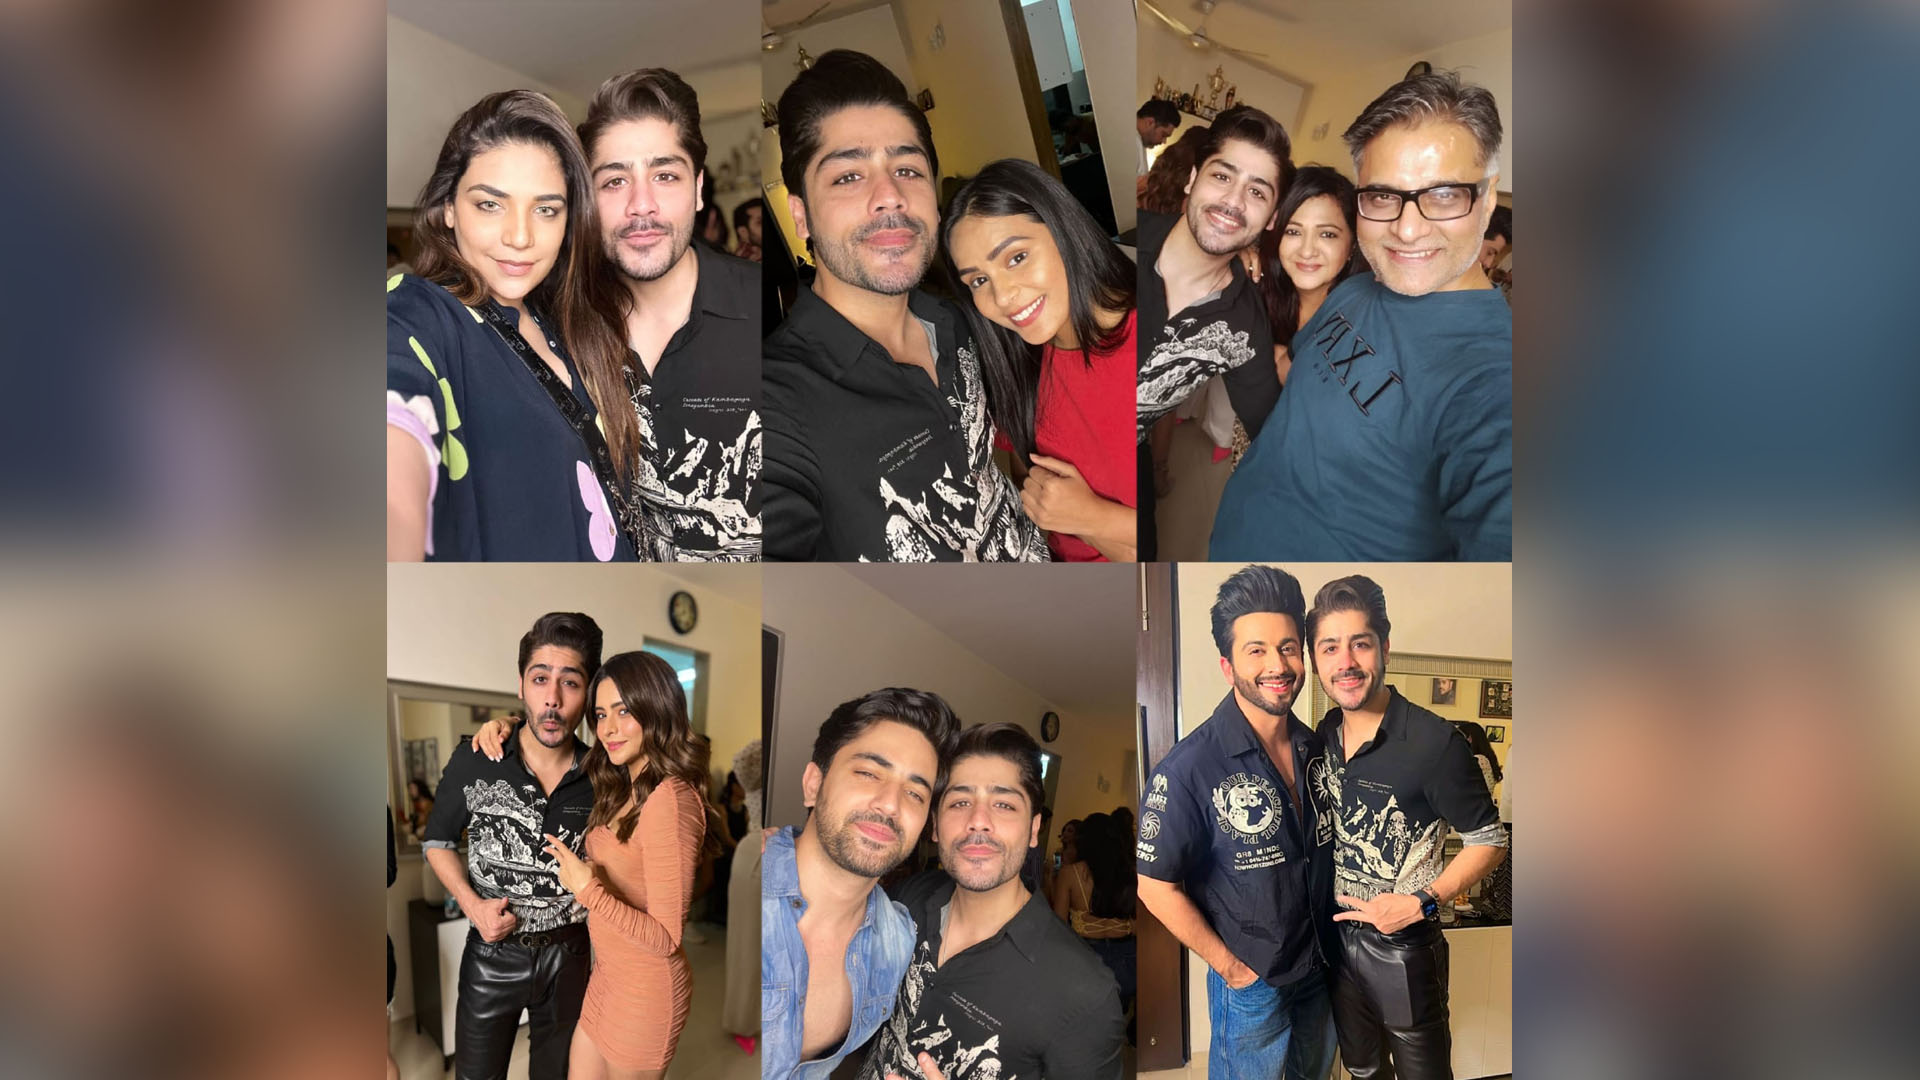 Abhishek Kapur Celebrated His Birthday With his Kundali Bhagya Family, Says “They are my closest friends and make me feel special always”